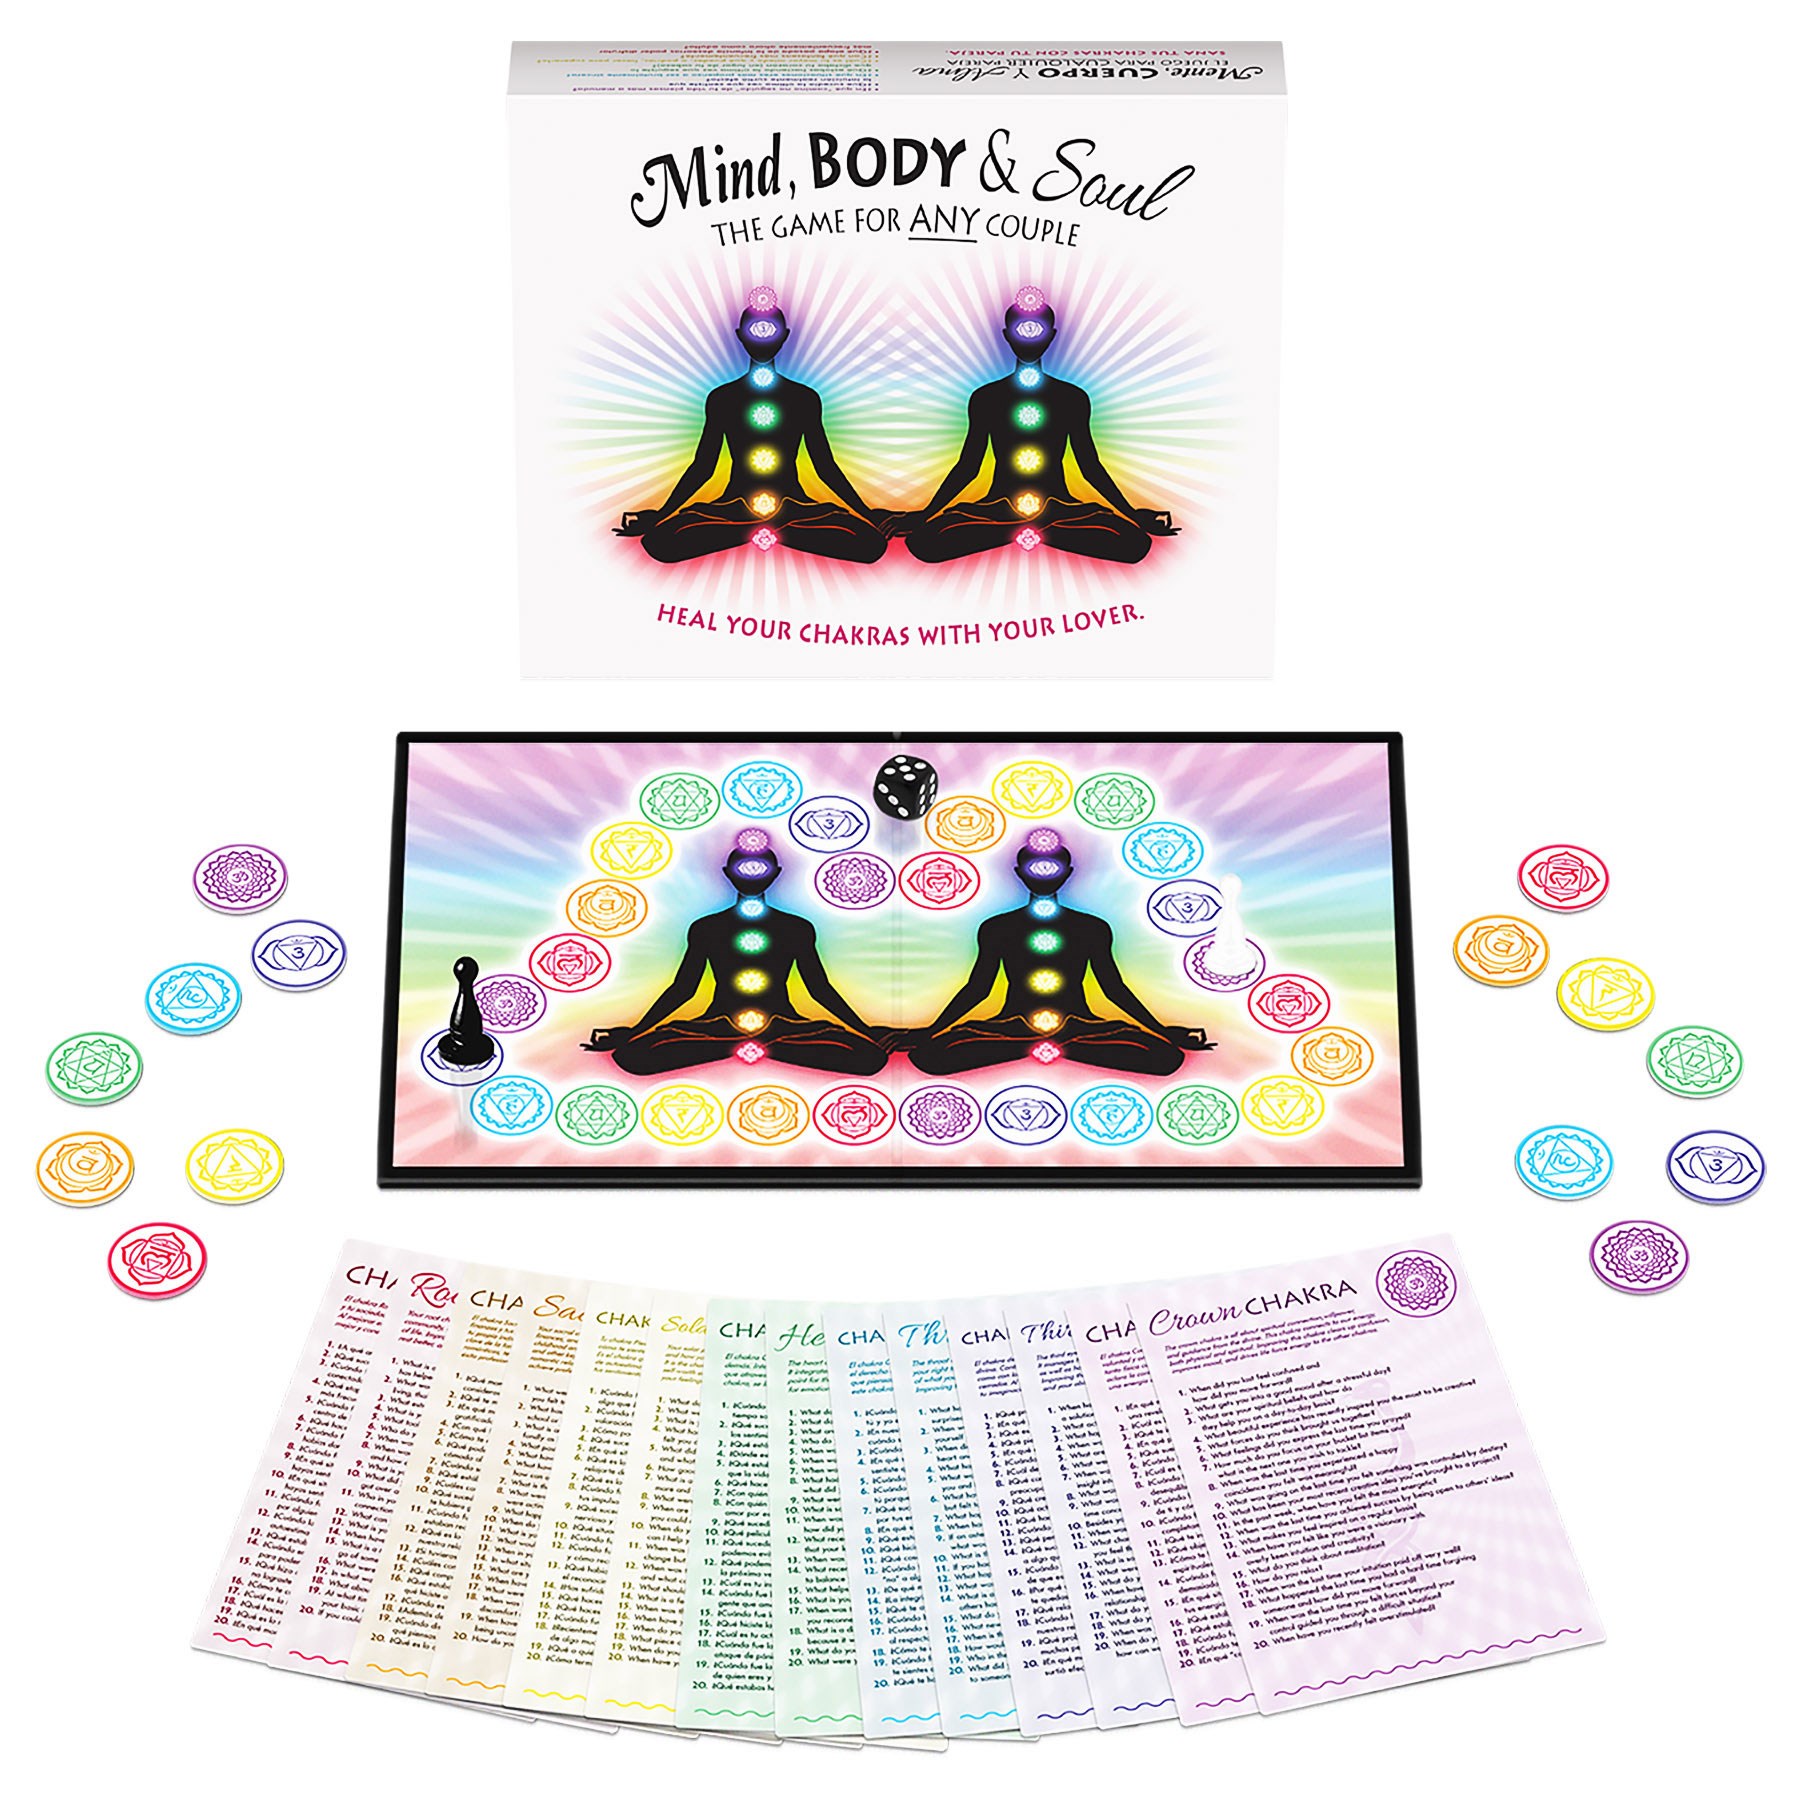 Mind, Body & Soul Game For Any Couple! all components